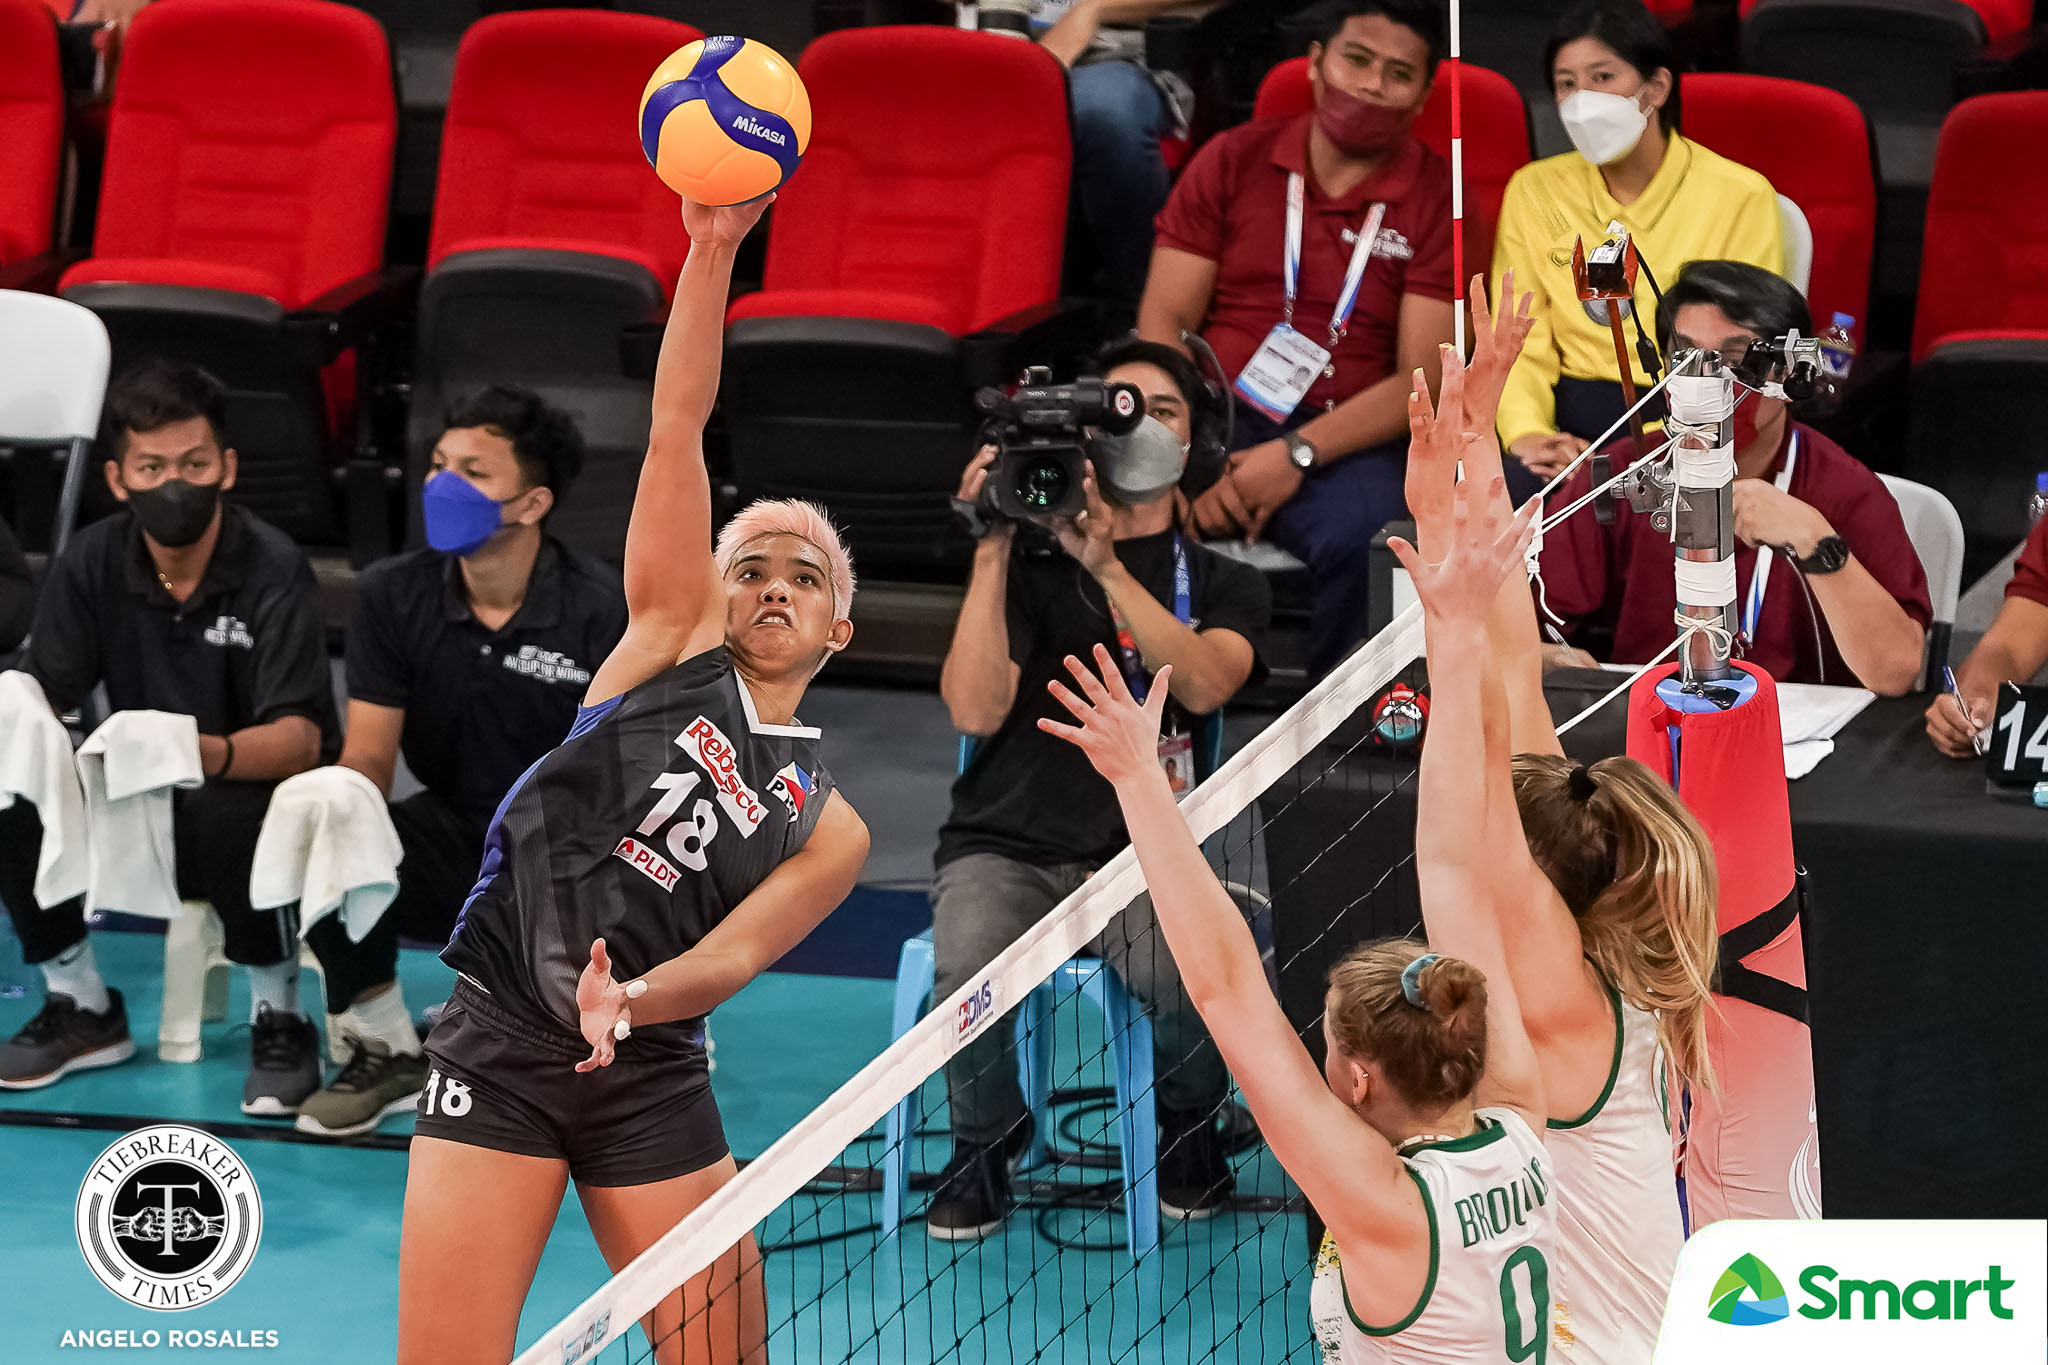 2022-AVC-WOMENS-CUP-AUS-vs-PHI-CARLOS-Tots-PHI-5 Tots Carlos relishes facing Asia's top hitters 2022 AVC Cup for Women News Volleyball  - philippine sports news